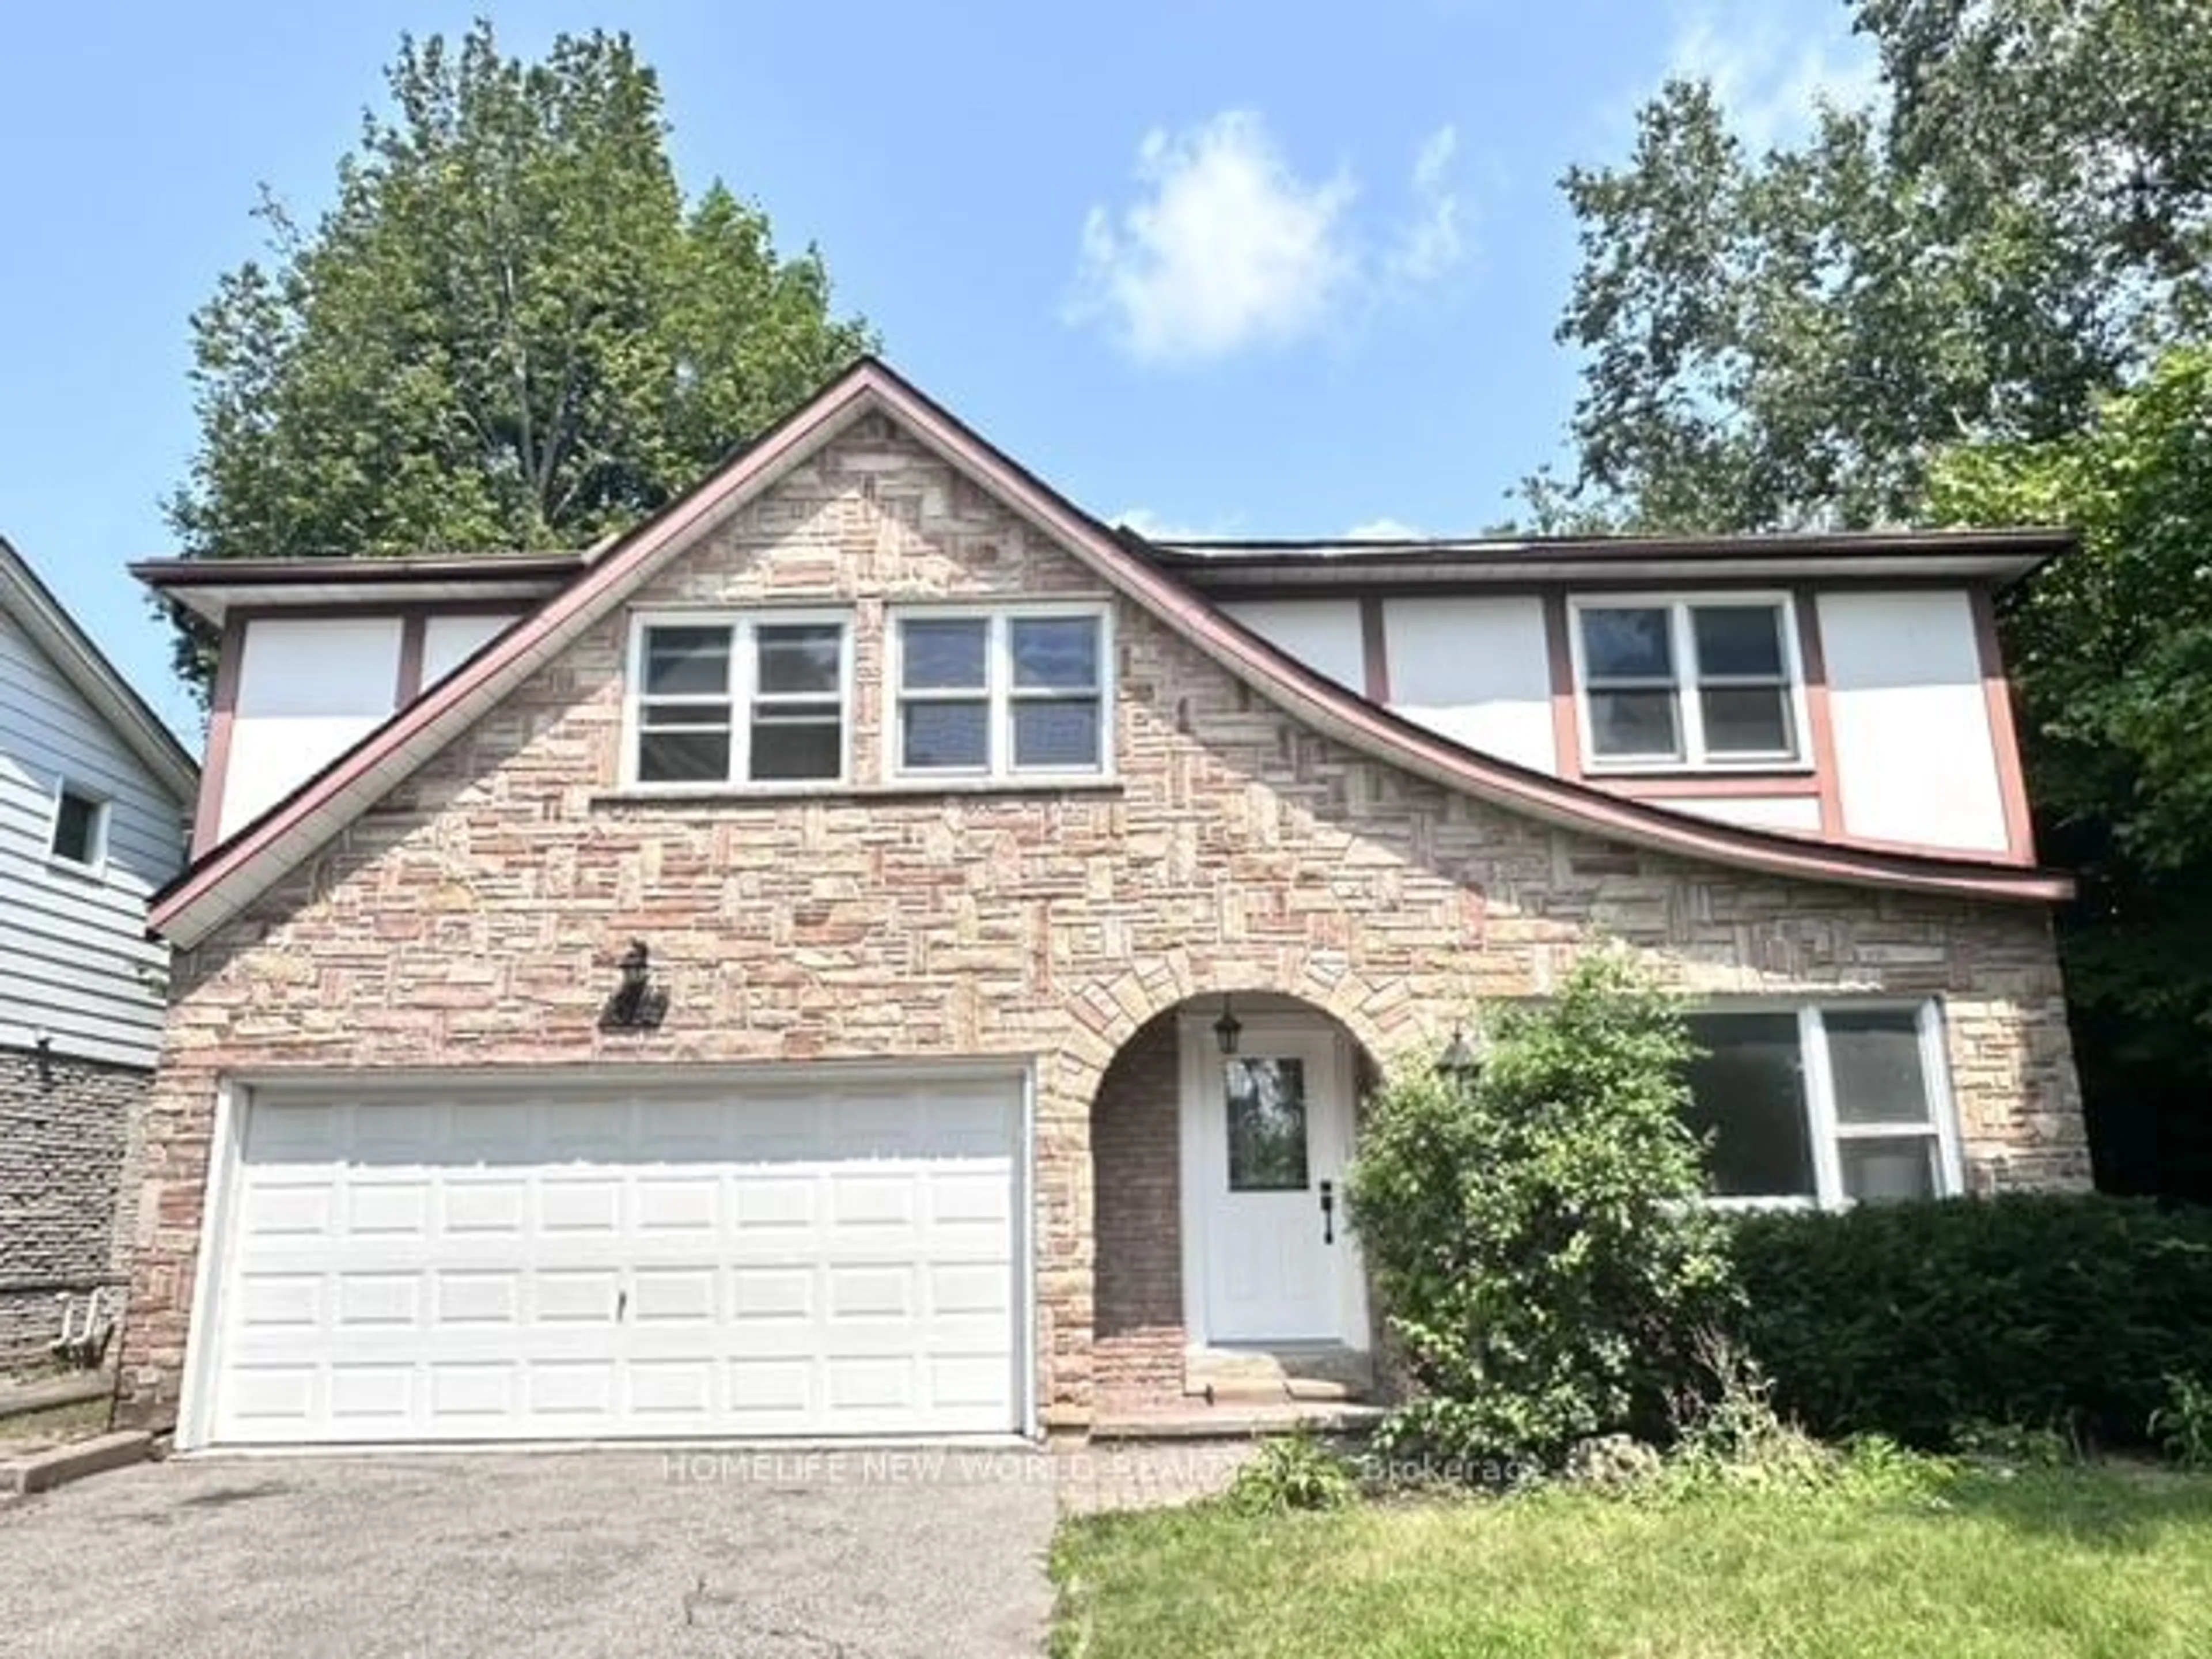 Home with brick exterior material for 34 Ferrah St, Markham Ontario L3R 1N5